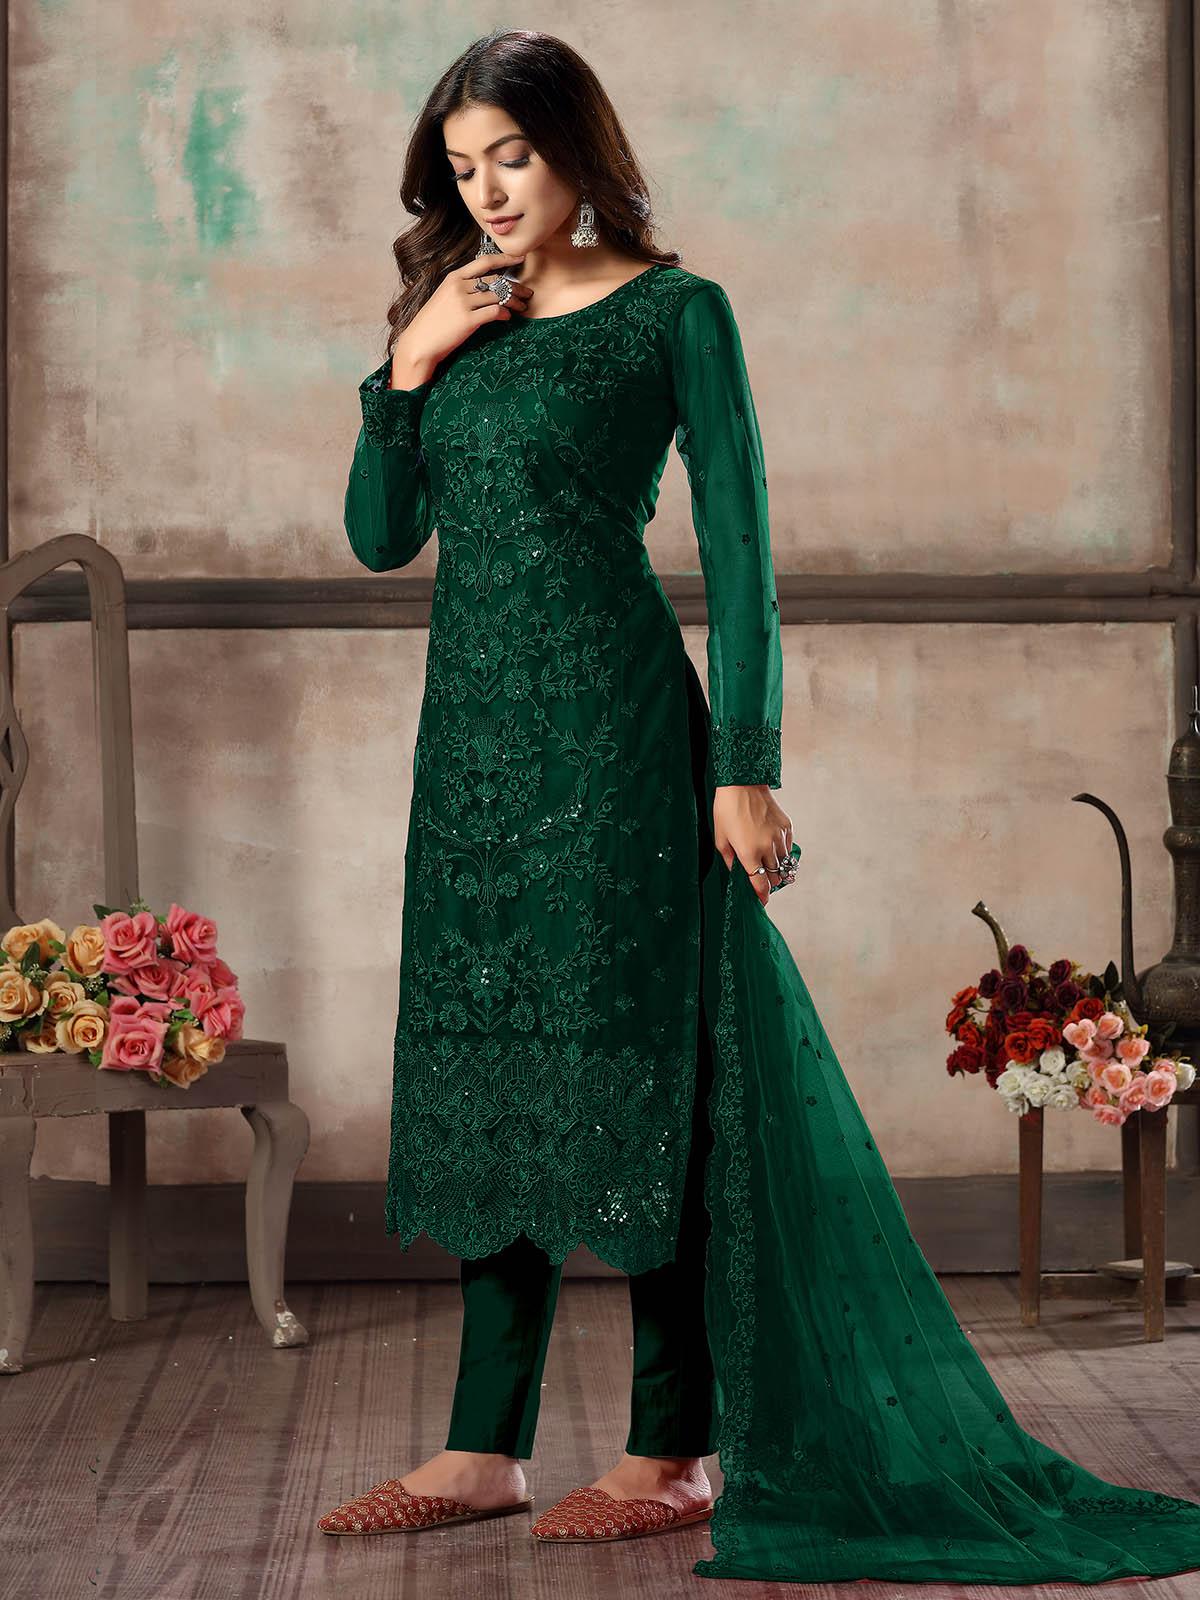 Dark Green Color Function Wear Crepe Fabric Salwar Suit With Coveted  Embroidered Work